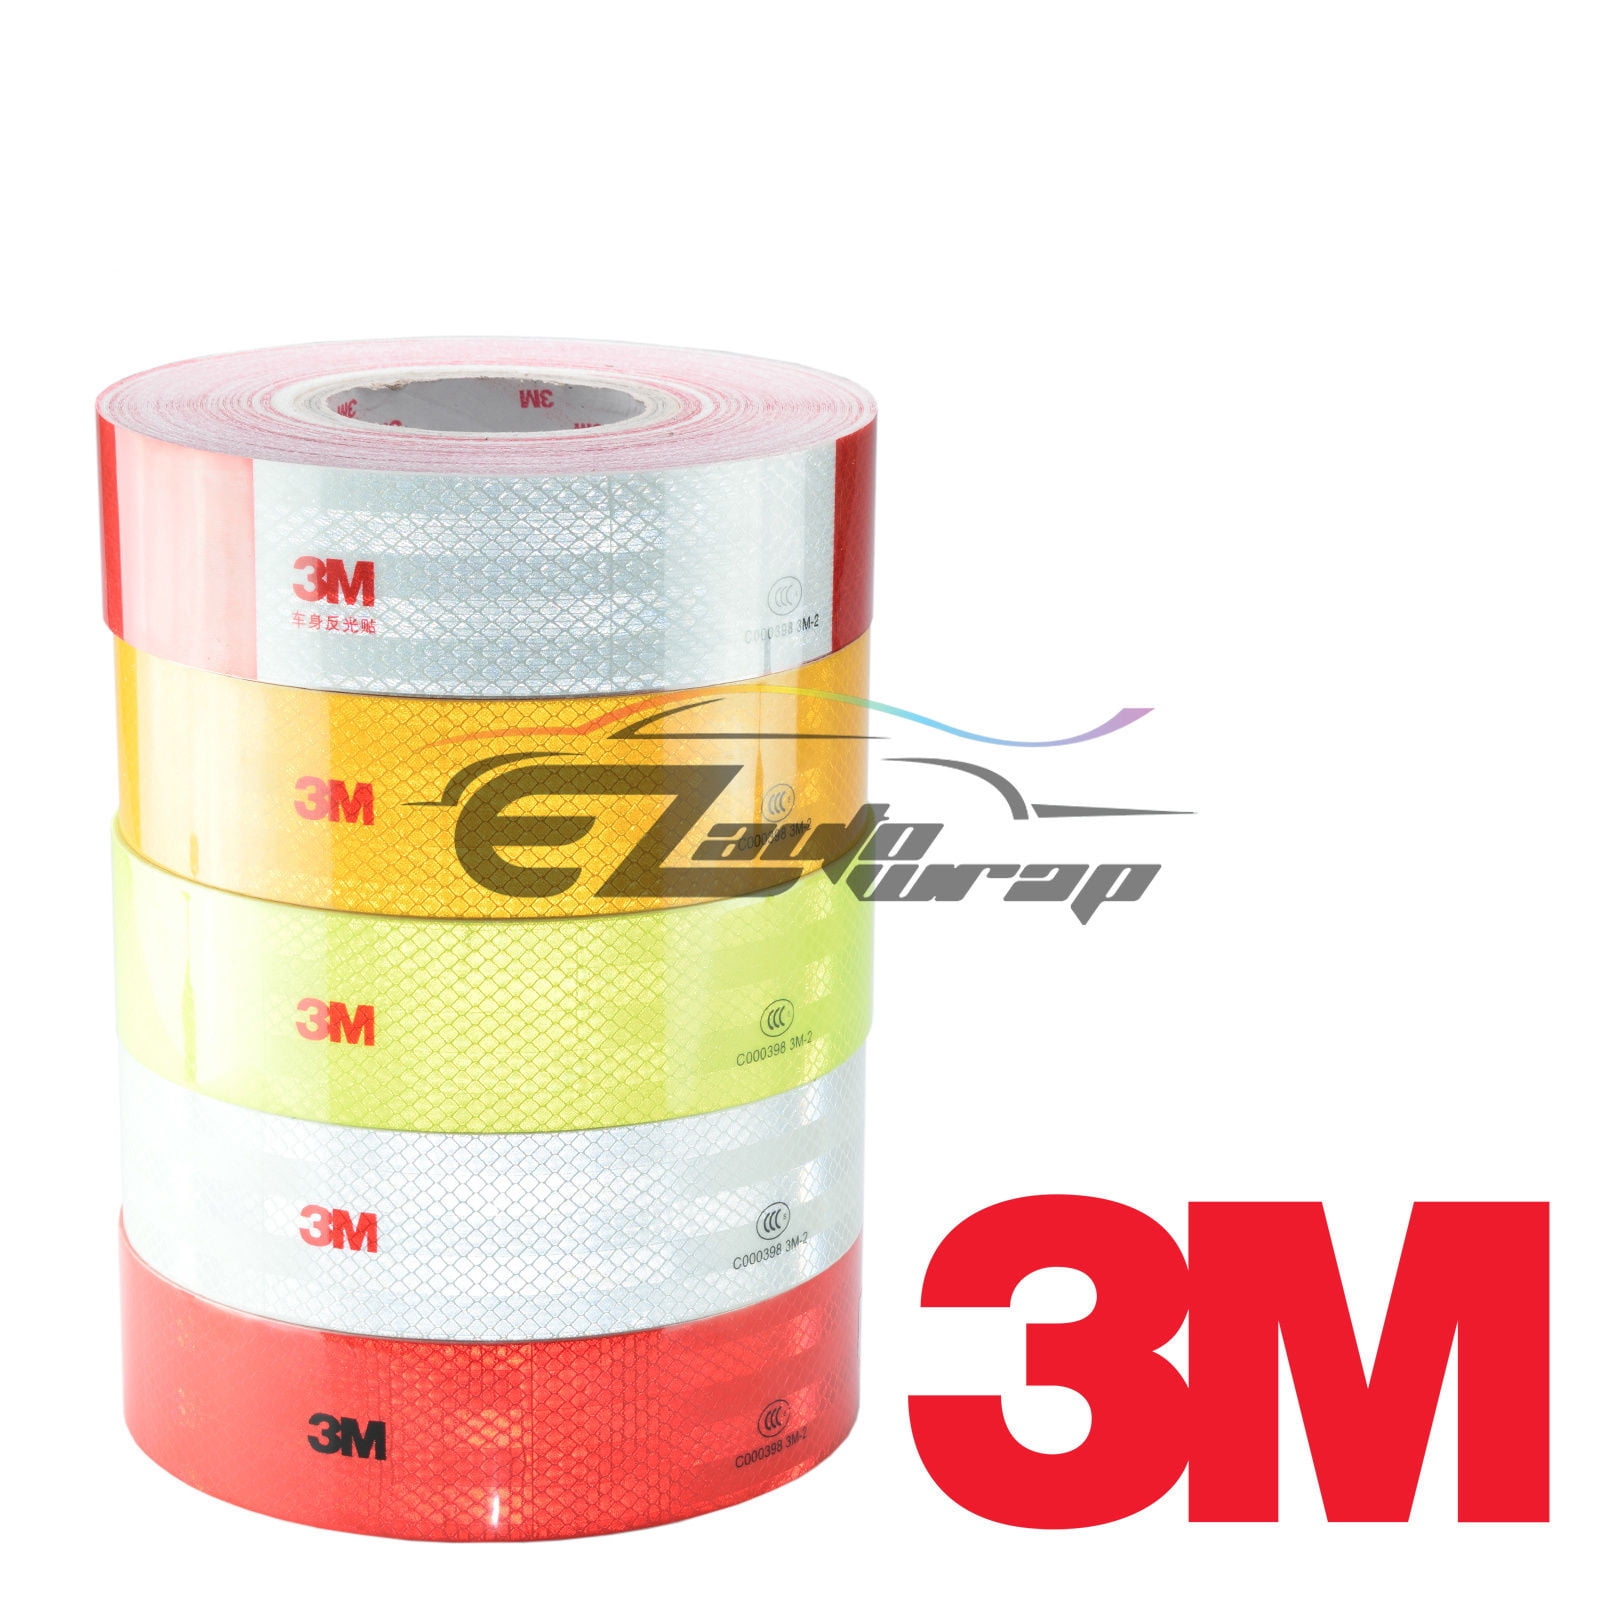 3M 2" x 150' Diamond Grade Conspicuity Reflective Tape CE Approved Safety Sign 